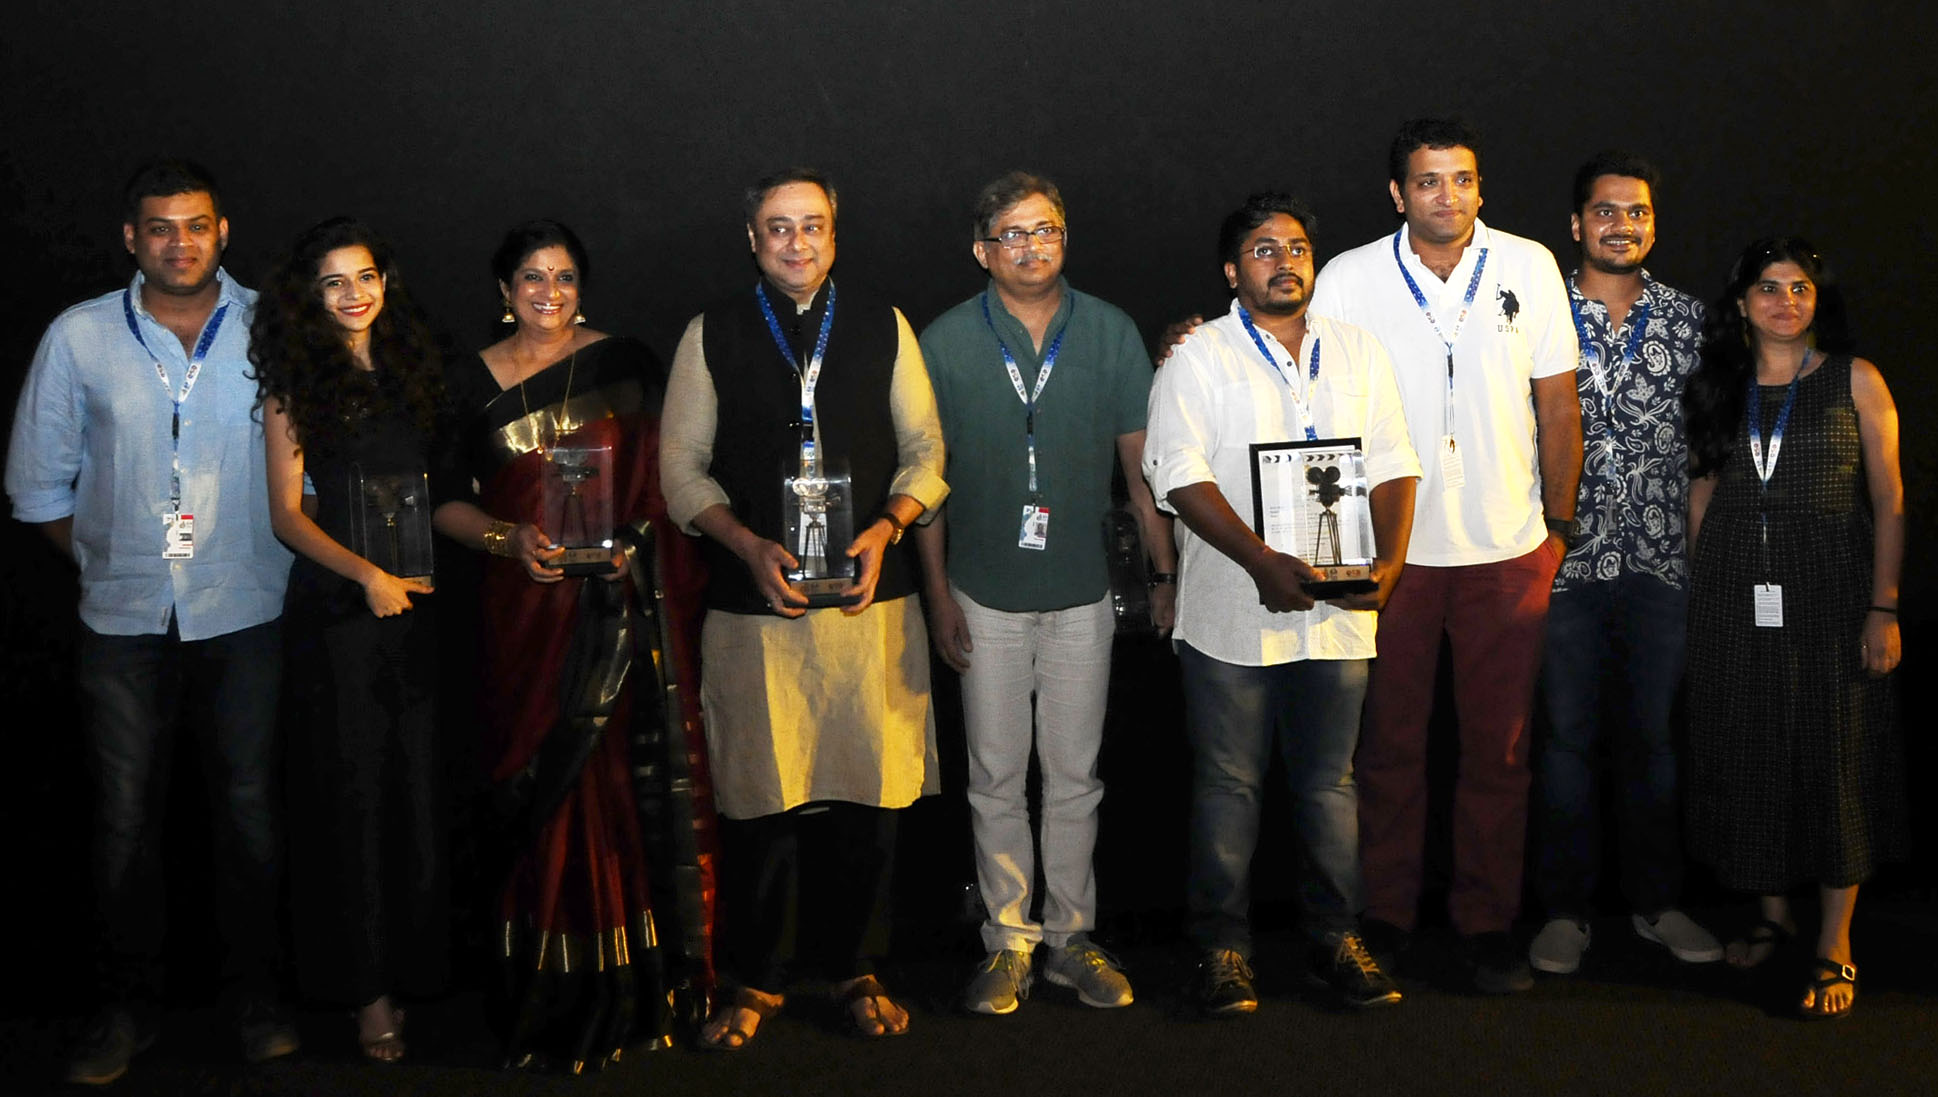 The Director Varun Narvekar with the Cast & Crew of the film MURAMBA (Marathi), at the Presentation, during the 48th International Film Festival of India (IFFI-2017), in Panaji, Goa on November 25, 2017.